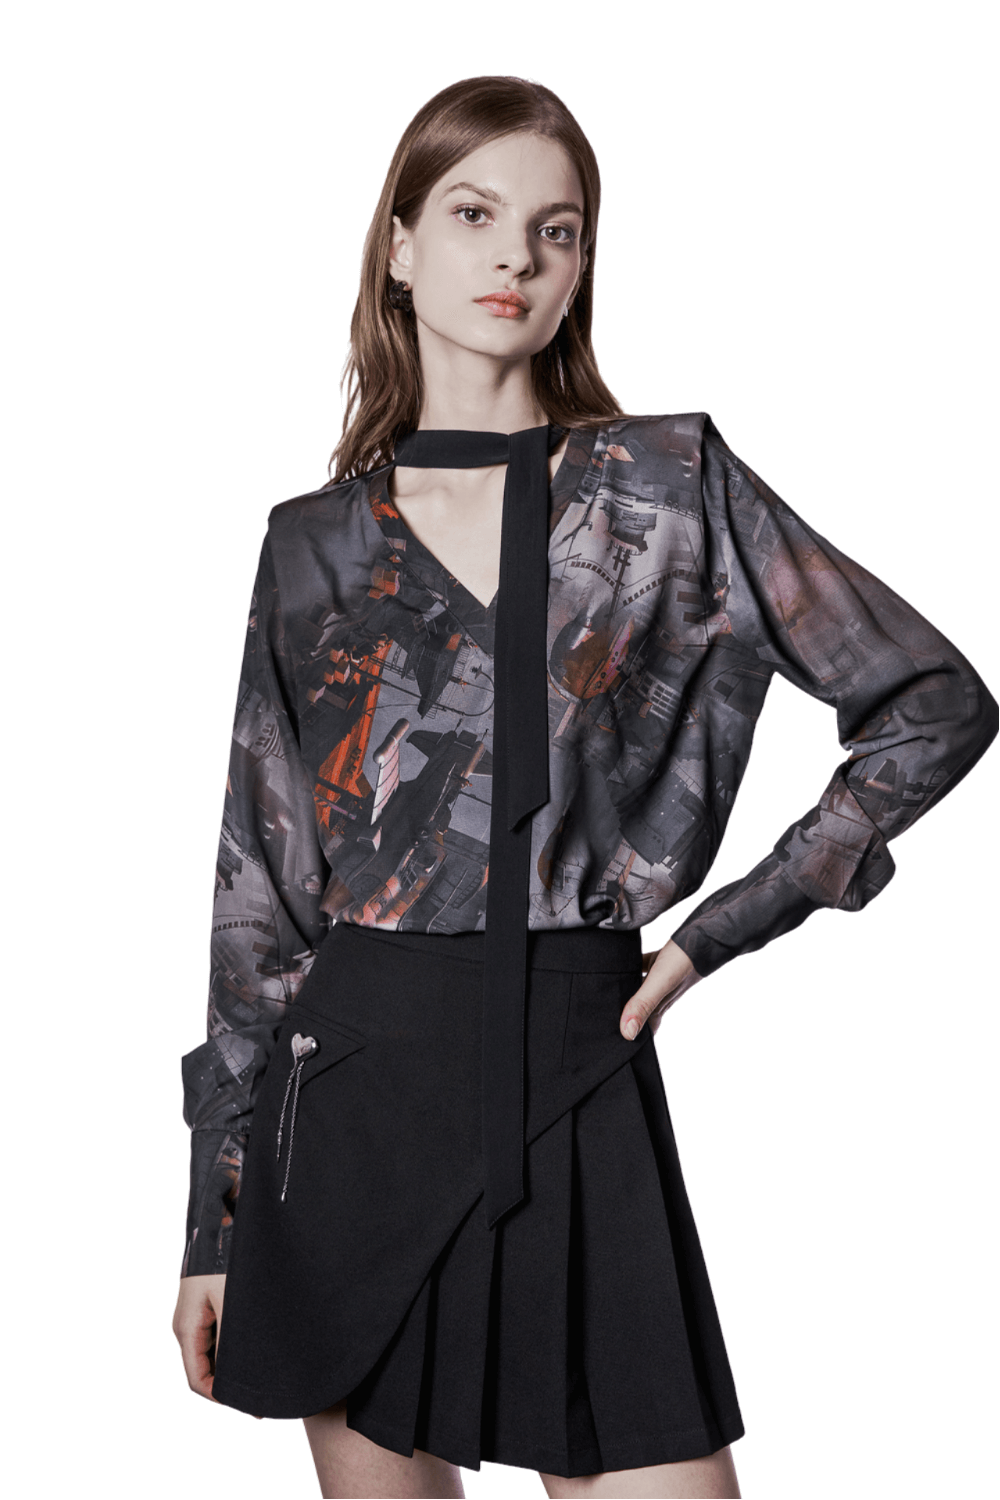 Urban Graphic V-Neck Blouse with Doomsday Print